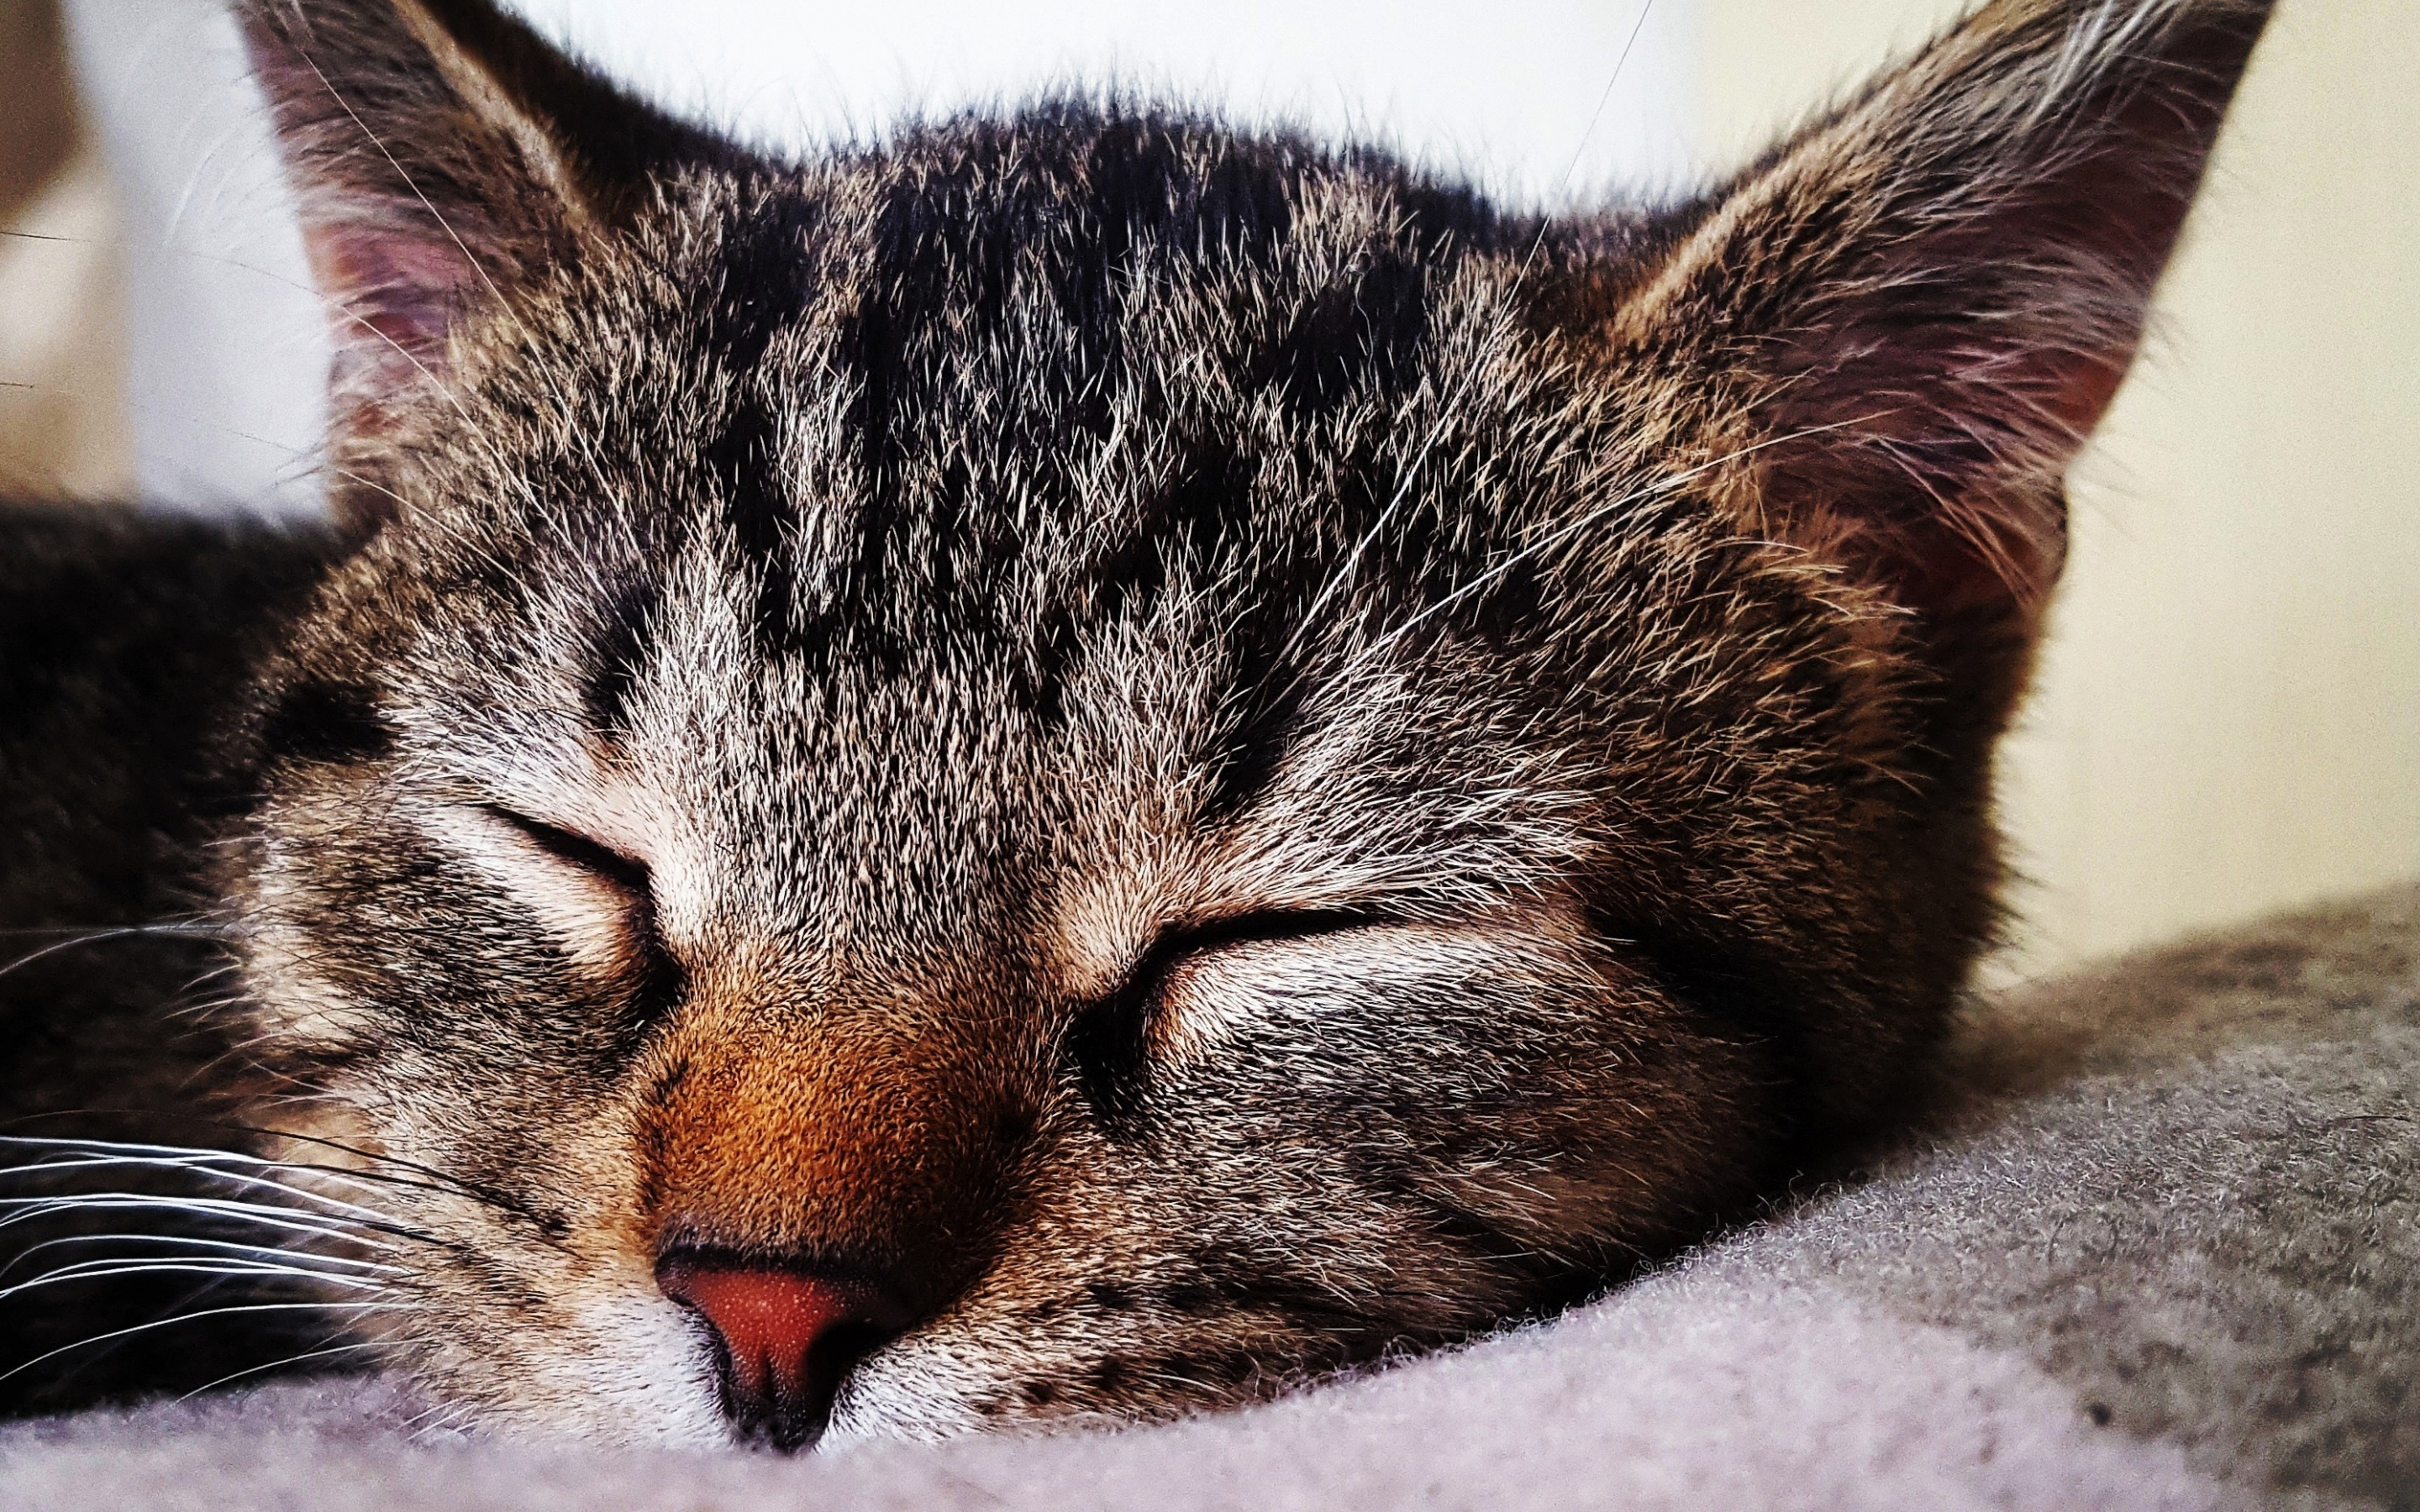 Relaxed, animal, cat, muzzle, closed eyes, 2880x1800 wallpaper